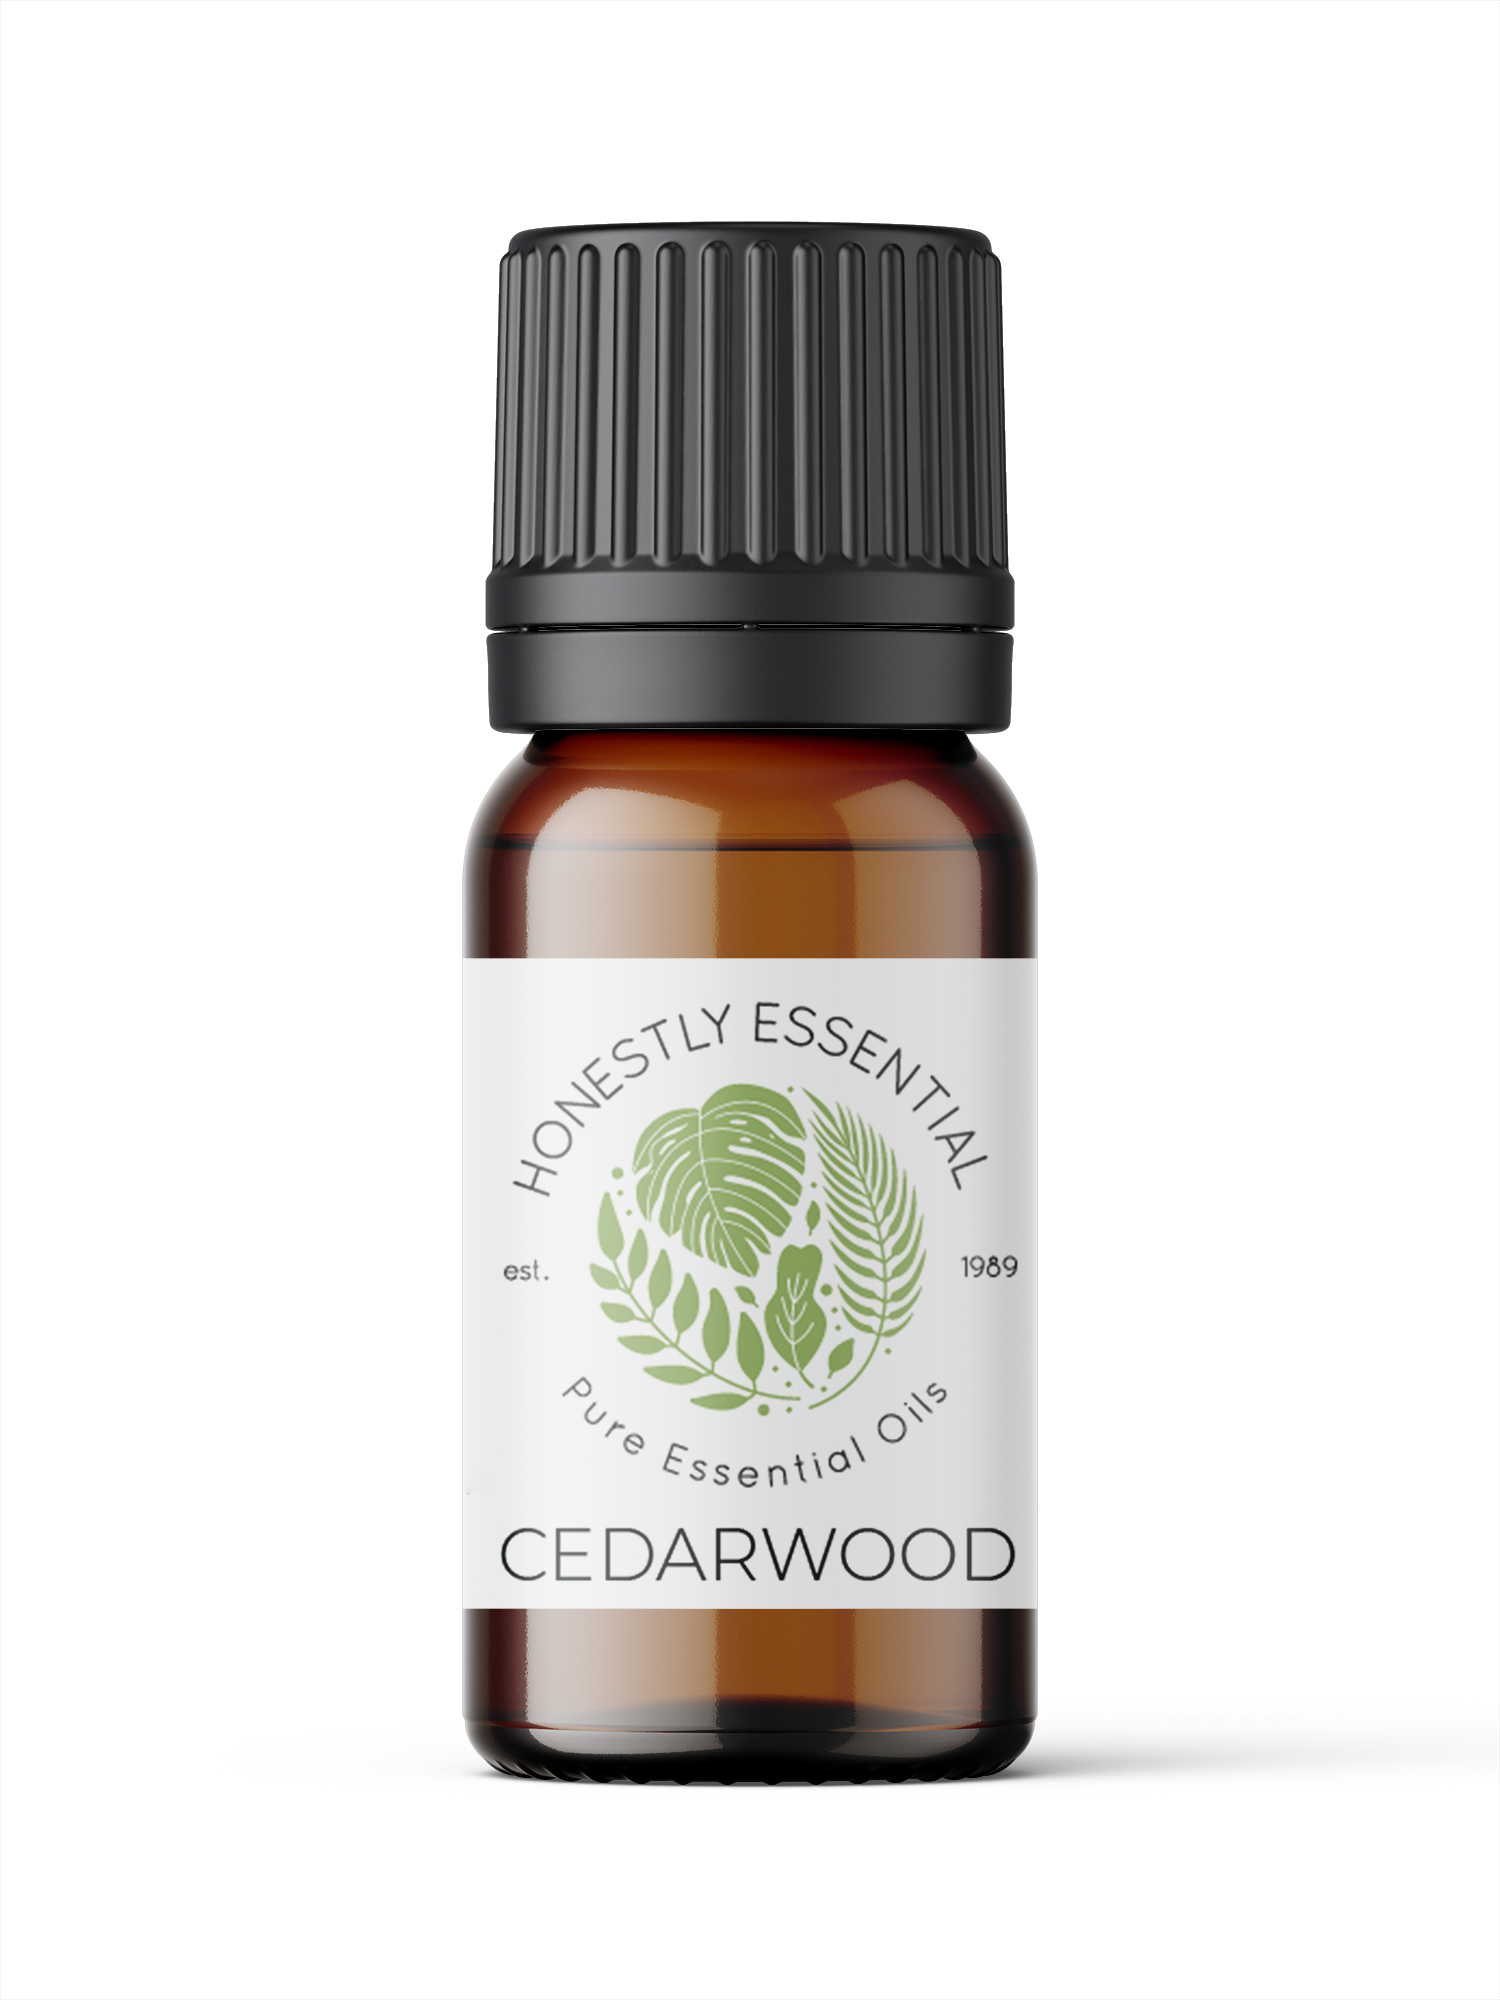 Cedarwood Essential Oil - Essential Oils | Honestly Essential Oils Insect and Pest Repellent, kid safe, tree, tree essential oil, trees